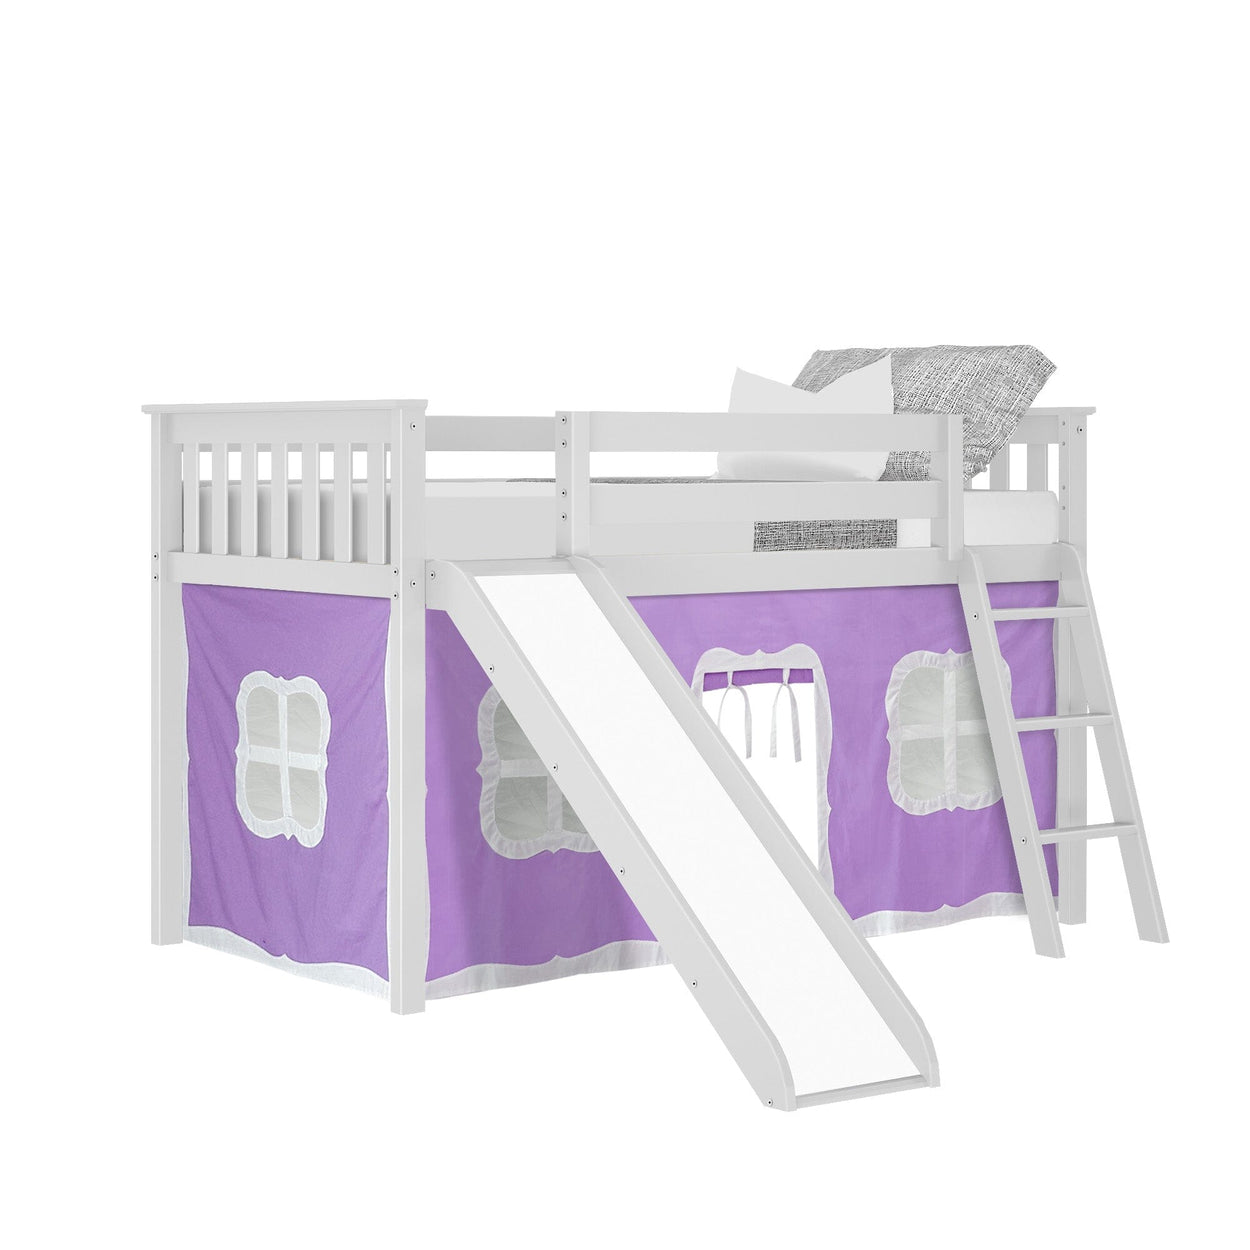 180213002061 : Loft Beds Twin-Size Low Loft with Slide with Curtain, White + Purple Curtain